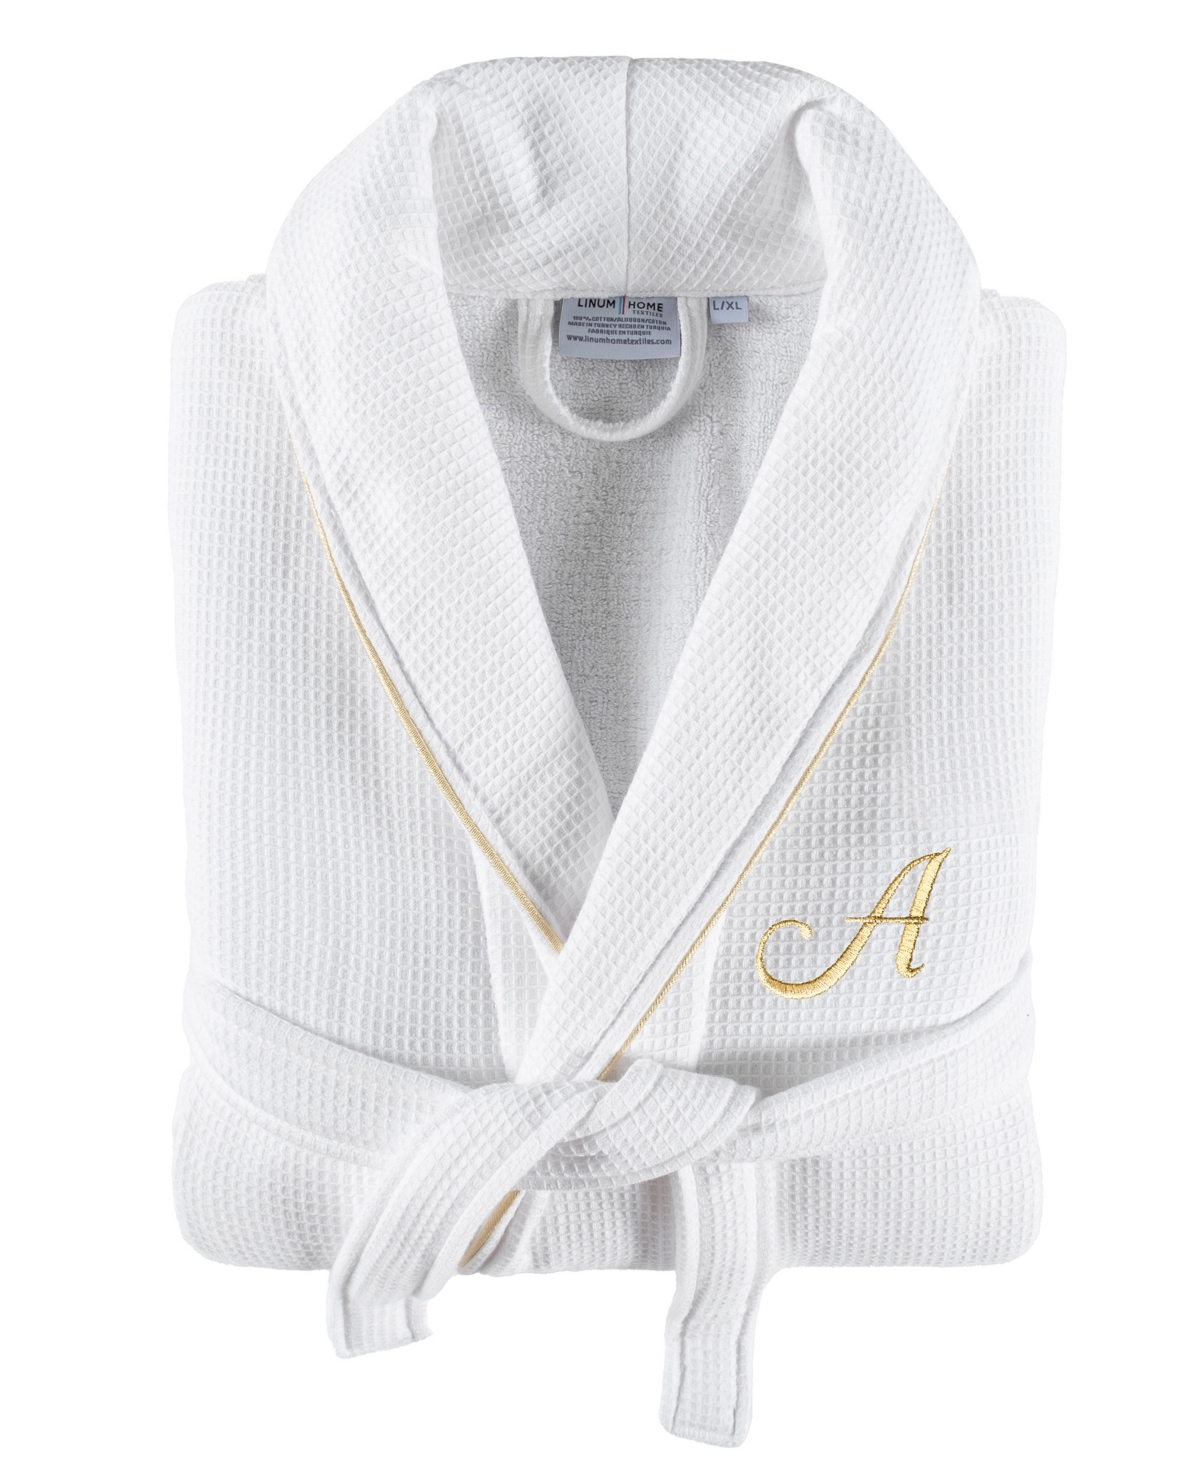 Linum Home Textiles 100% Turkish Cotton Unisex Personalized Waffle Weave Terry Bathrobe With Satin Piped Trim In White A